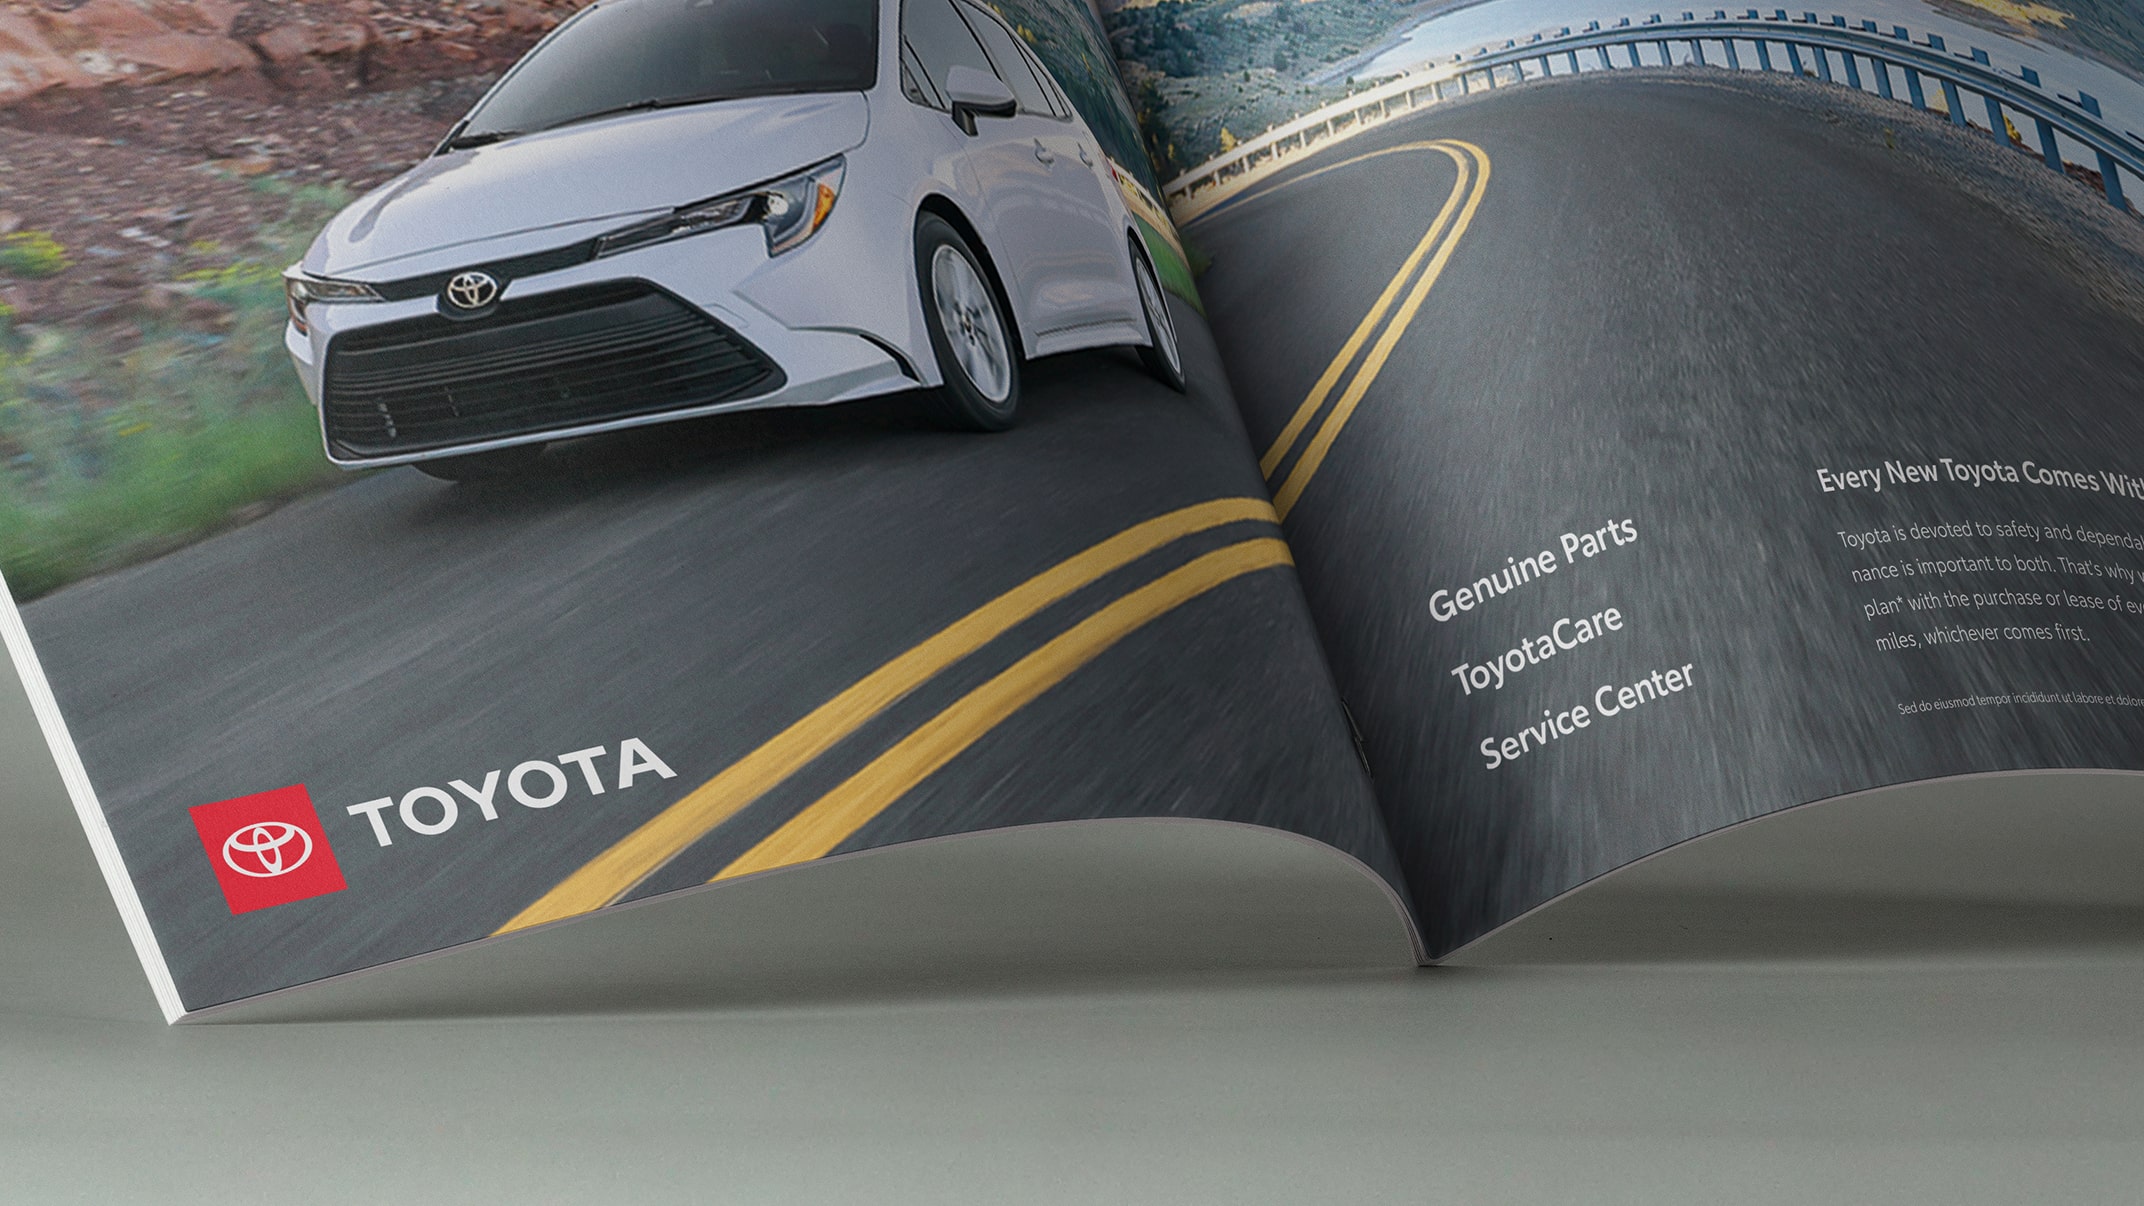 The bottom pages of a magazine show a vehicle driving along a highway. To the left is the Toyota logo. To the right of the page, the text reads “Genuine Parts, ToyotaCare, Service Center.”